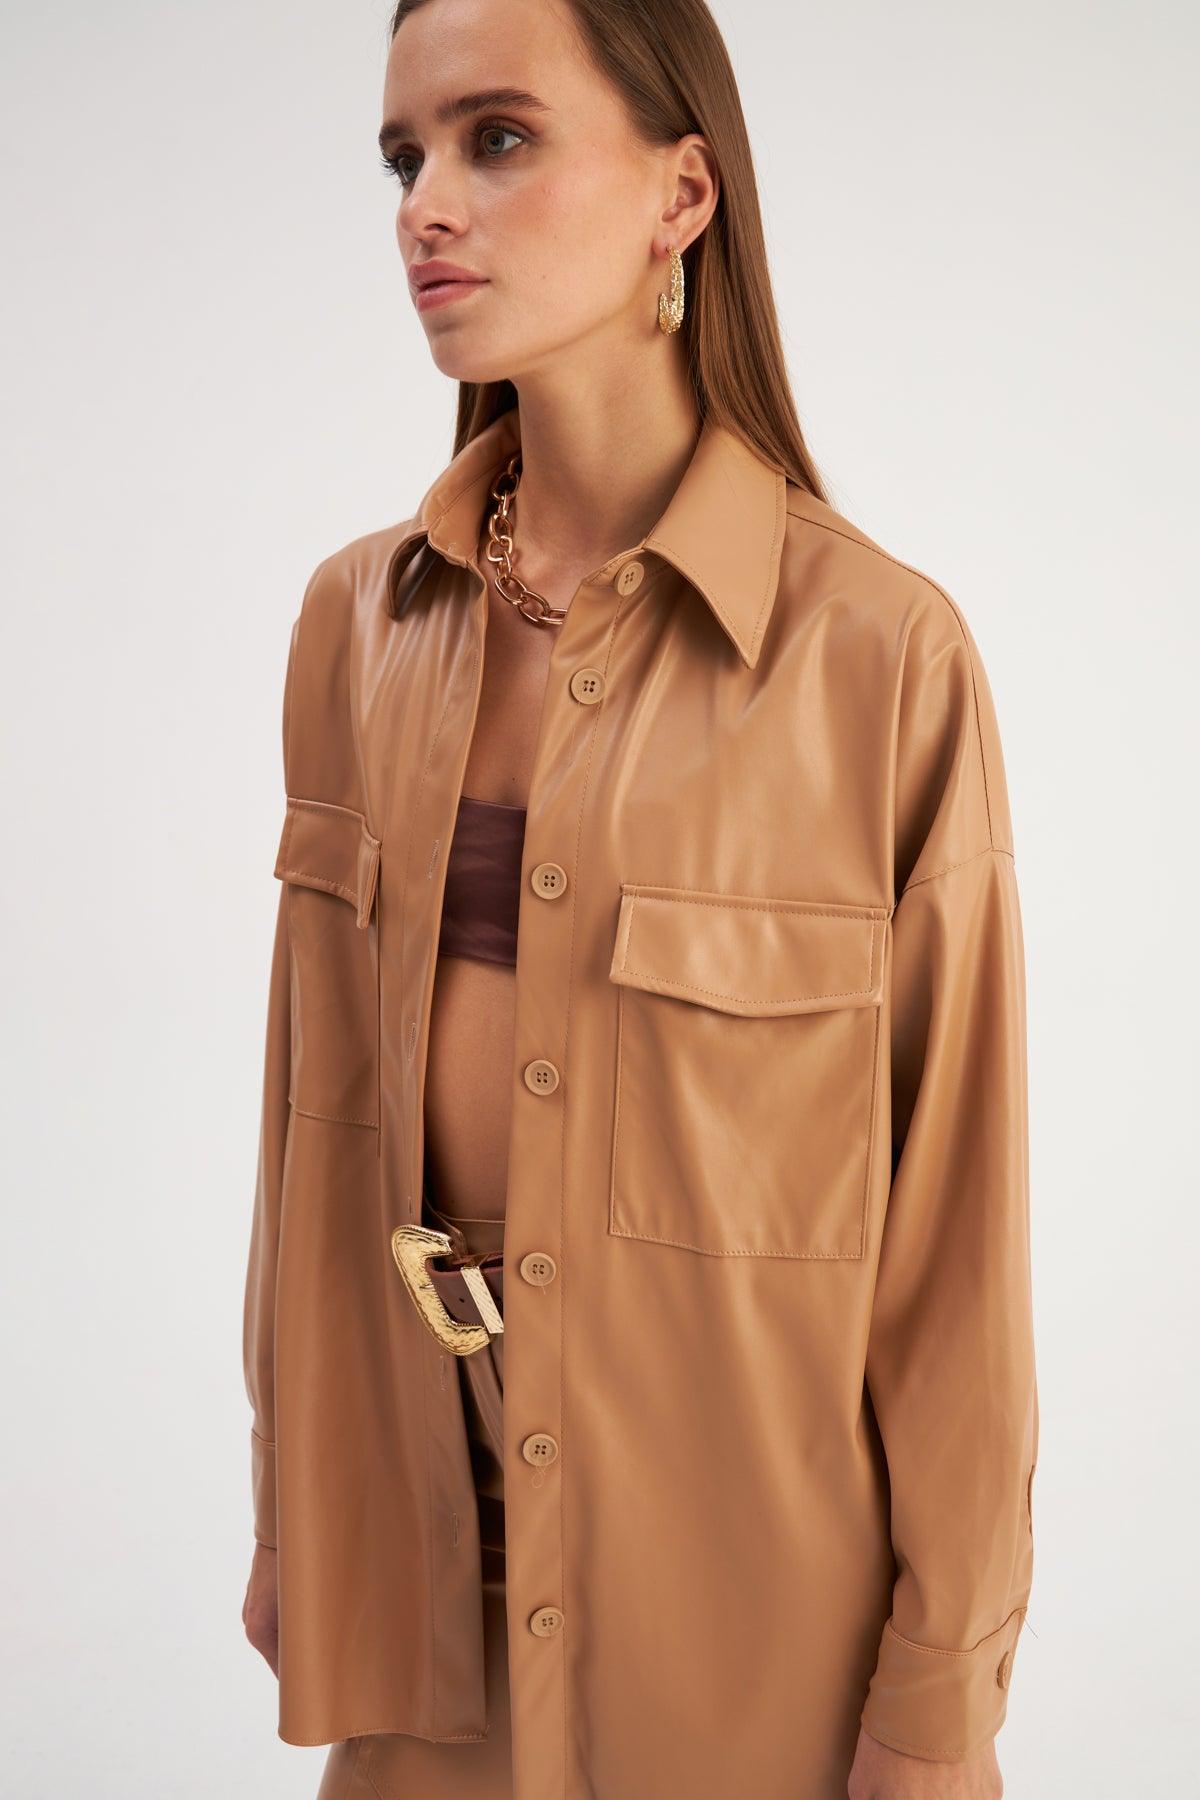 Long Leather Shirt With Pocket ZEFASH